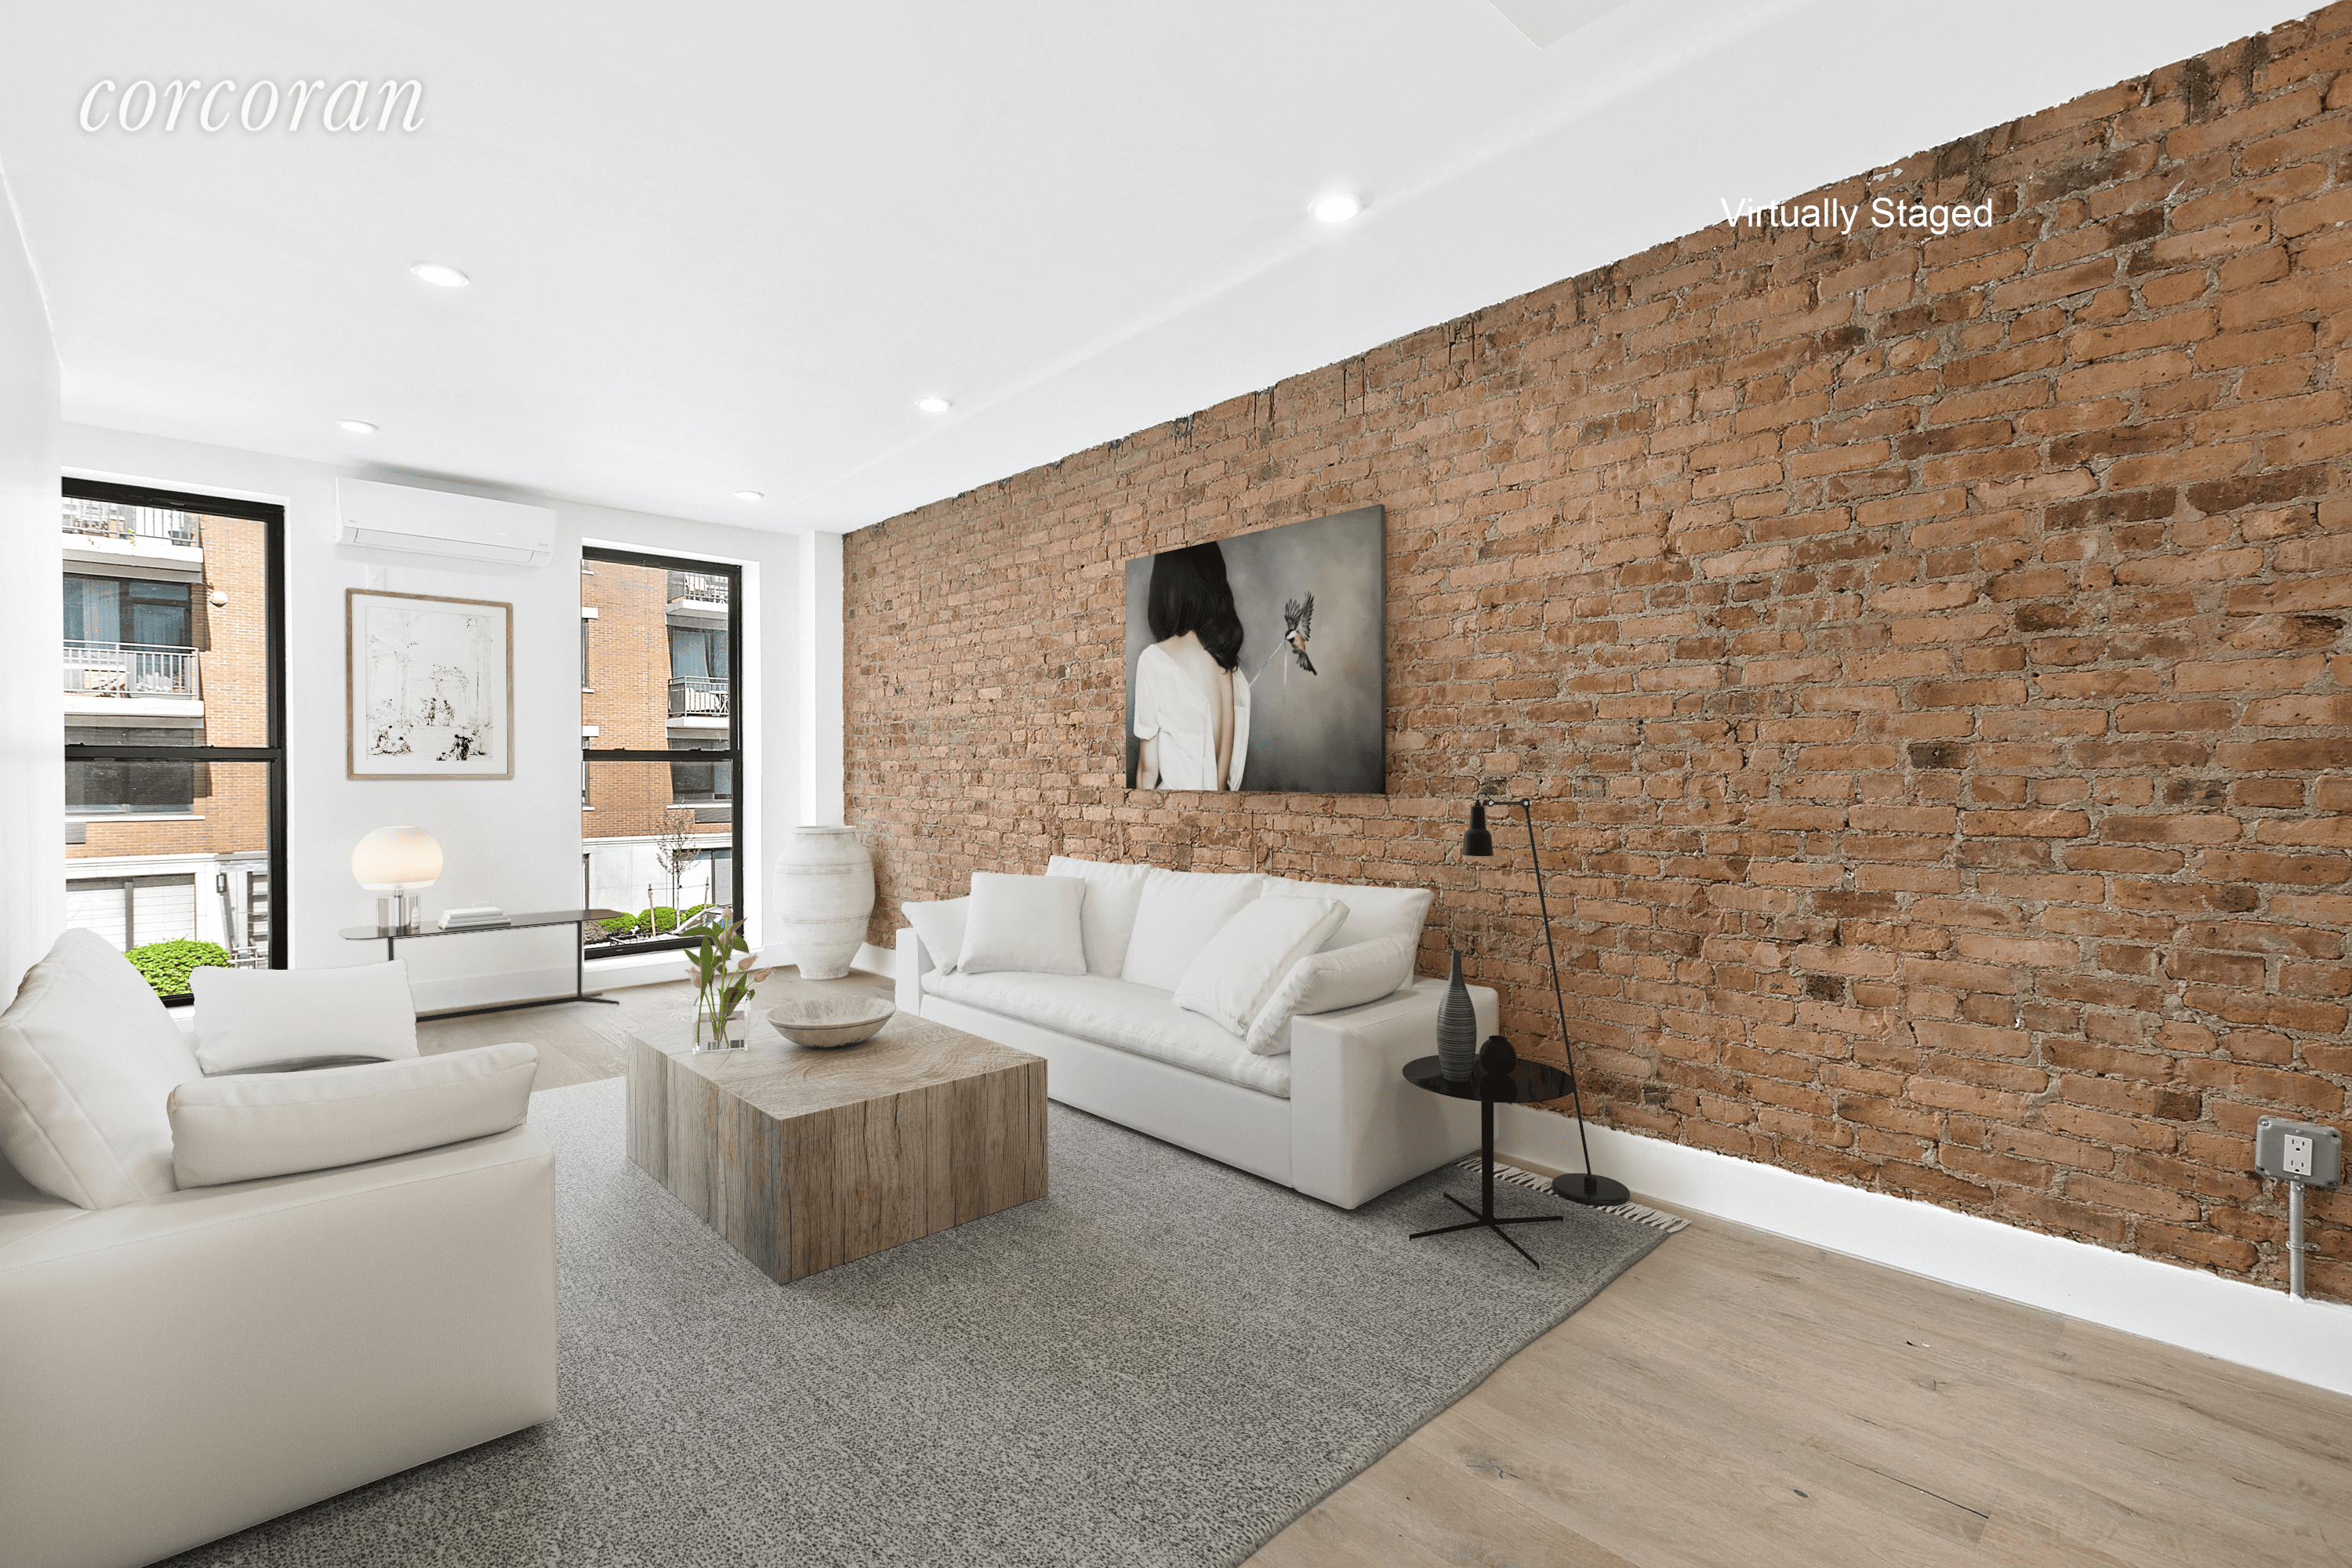 Residence 3A, just two flights up, a 2 bedroom, 1 bathroom duplex boasting large 373 SF private terrace, exposed brick details, northern exposure through nearly floor to ceiling windows allowing ...